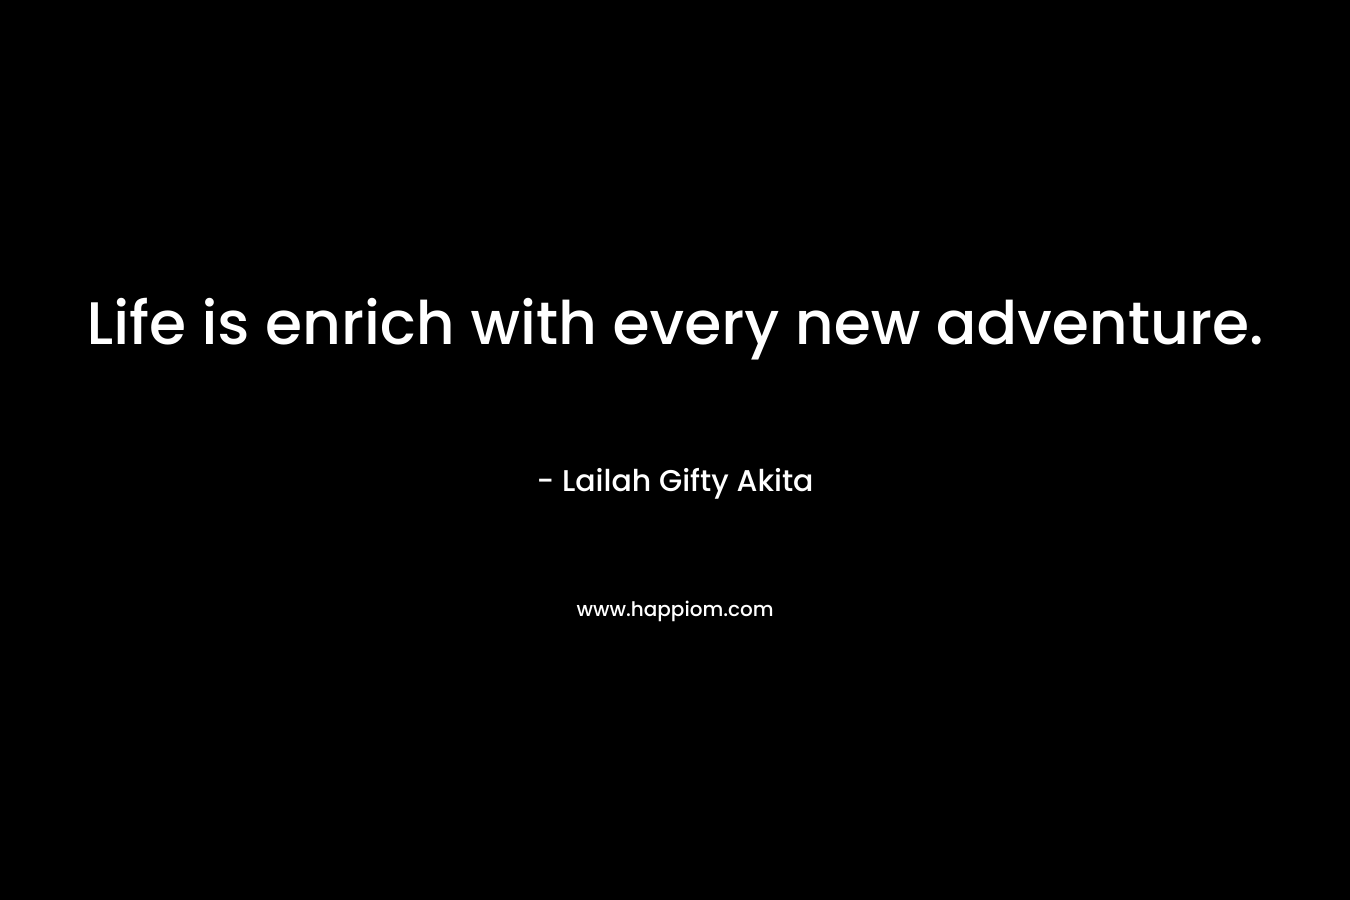 Life is enrich with every new adventure. – Lailah Gifty Akita